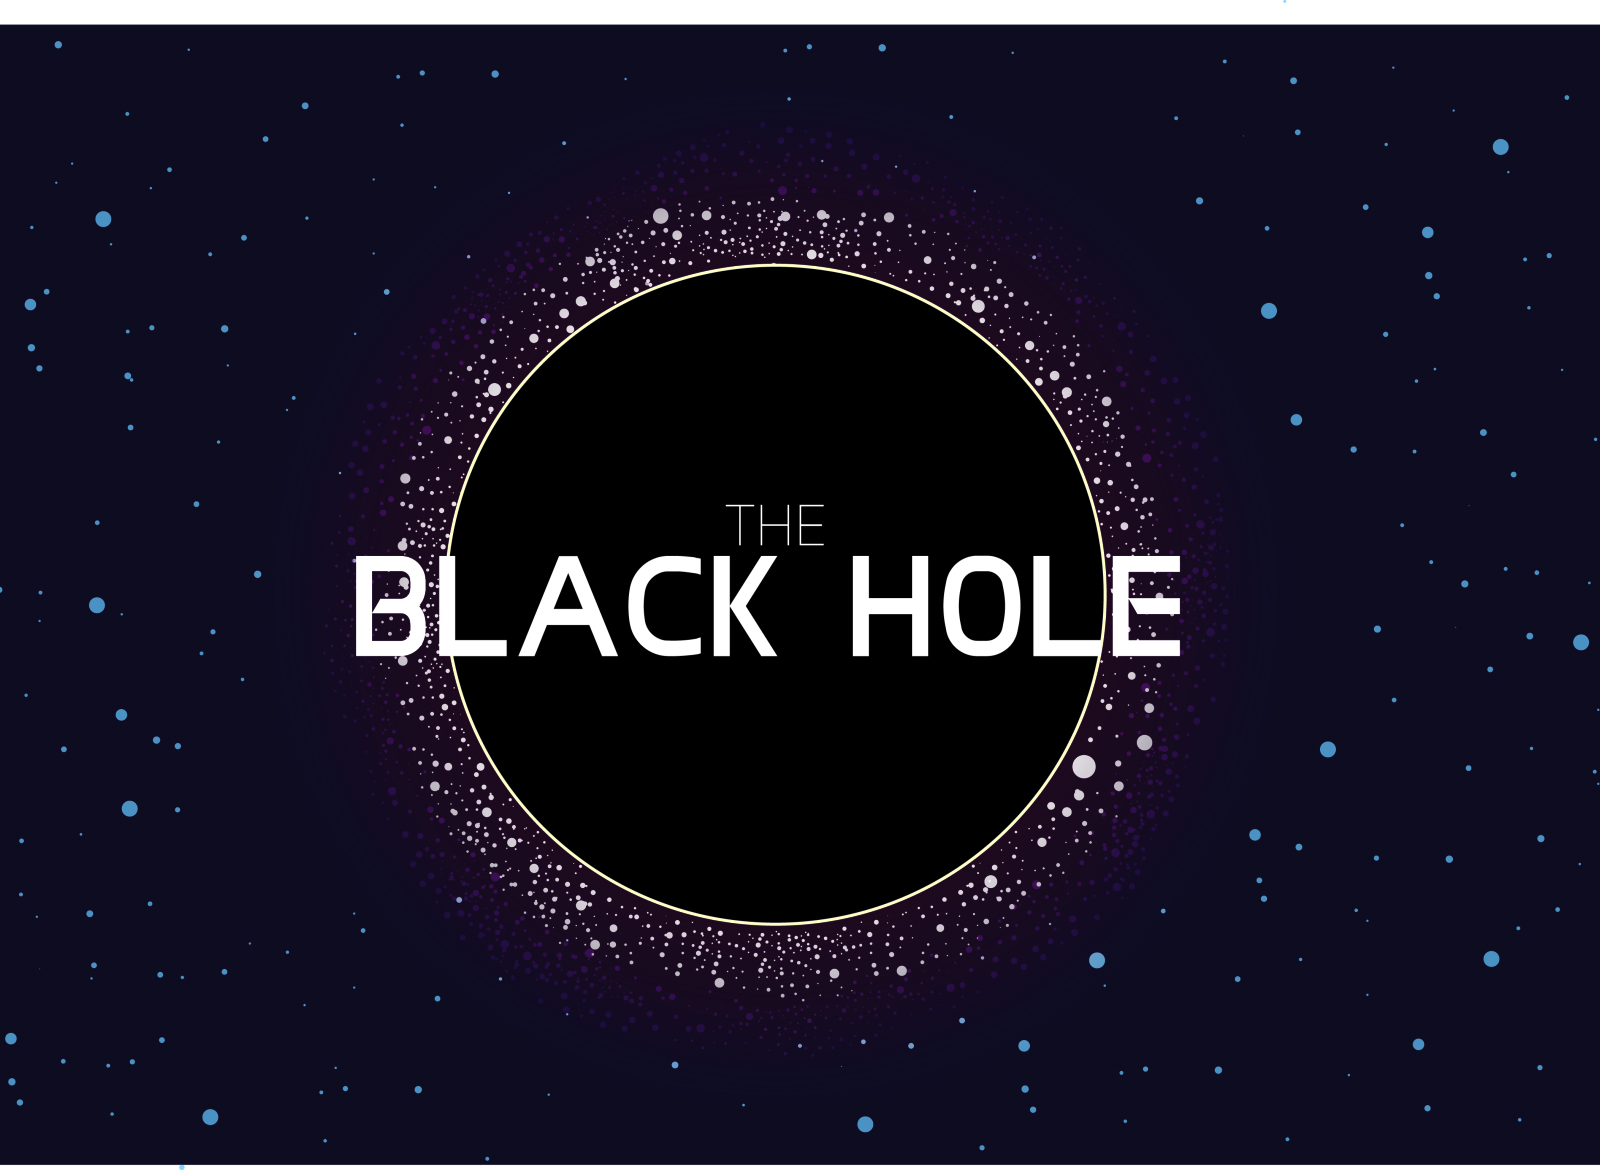 Black hole Illustration by Nathan on Dribbble